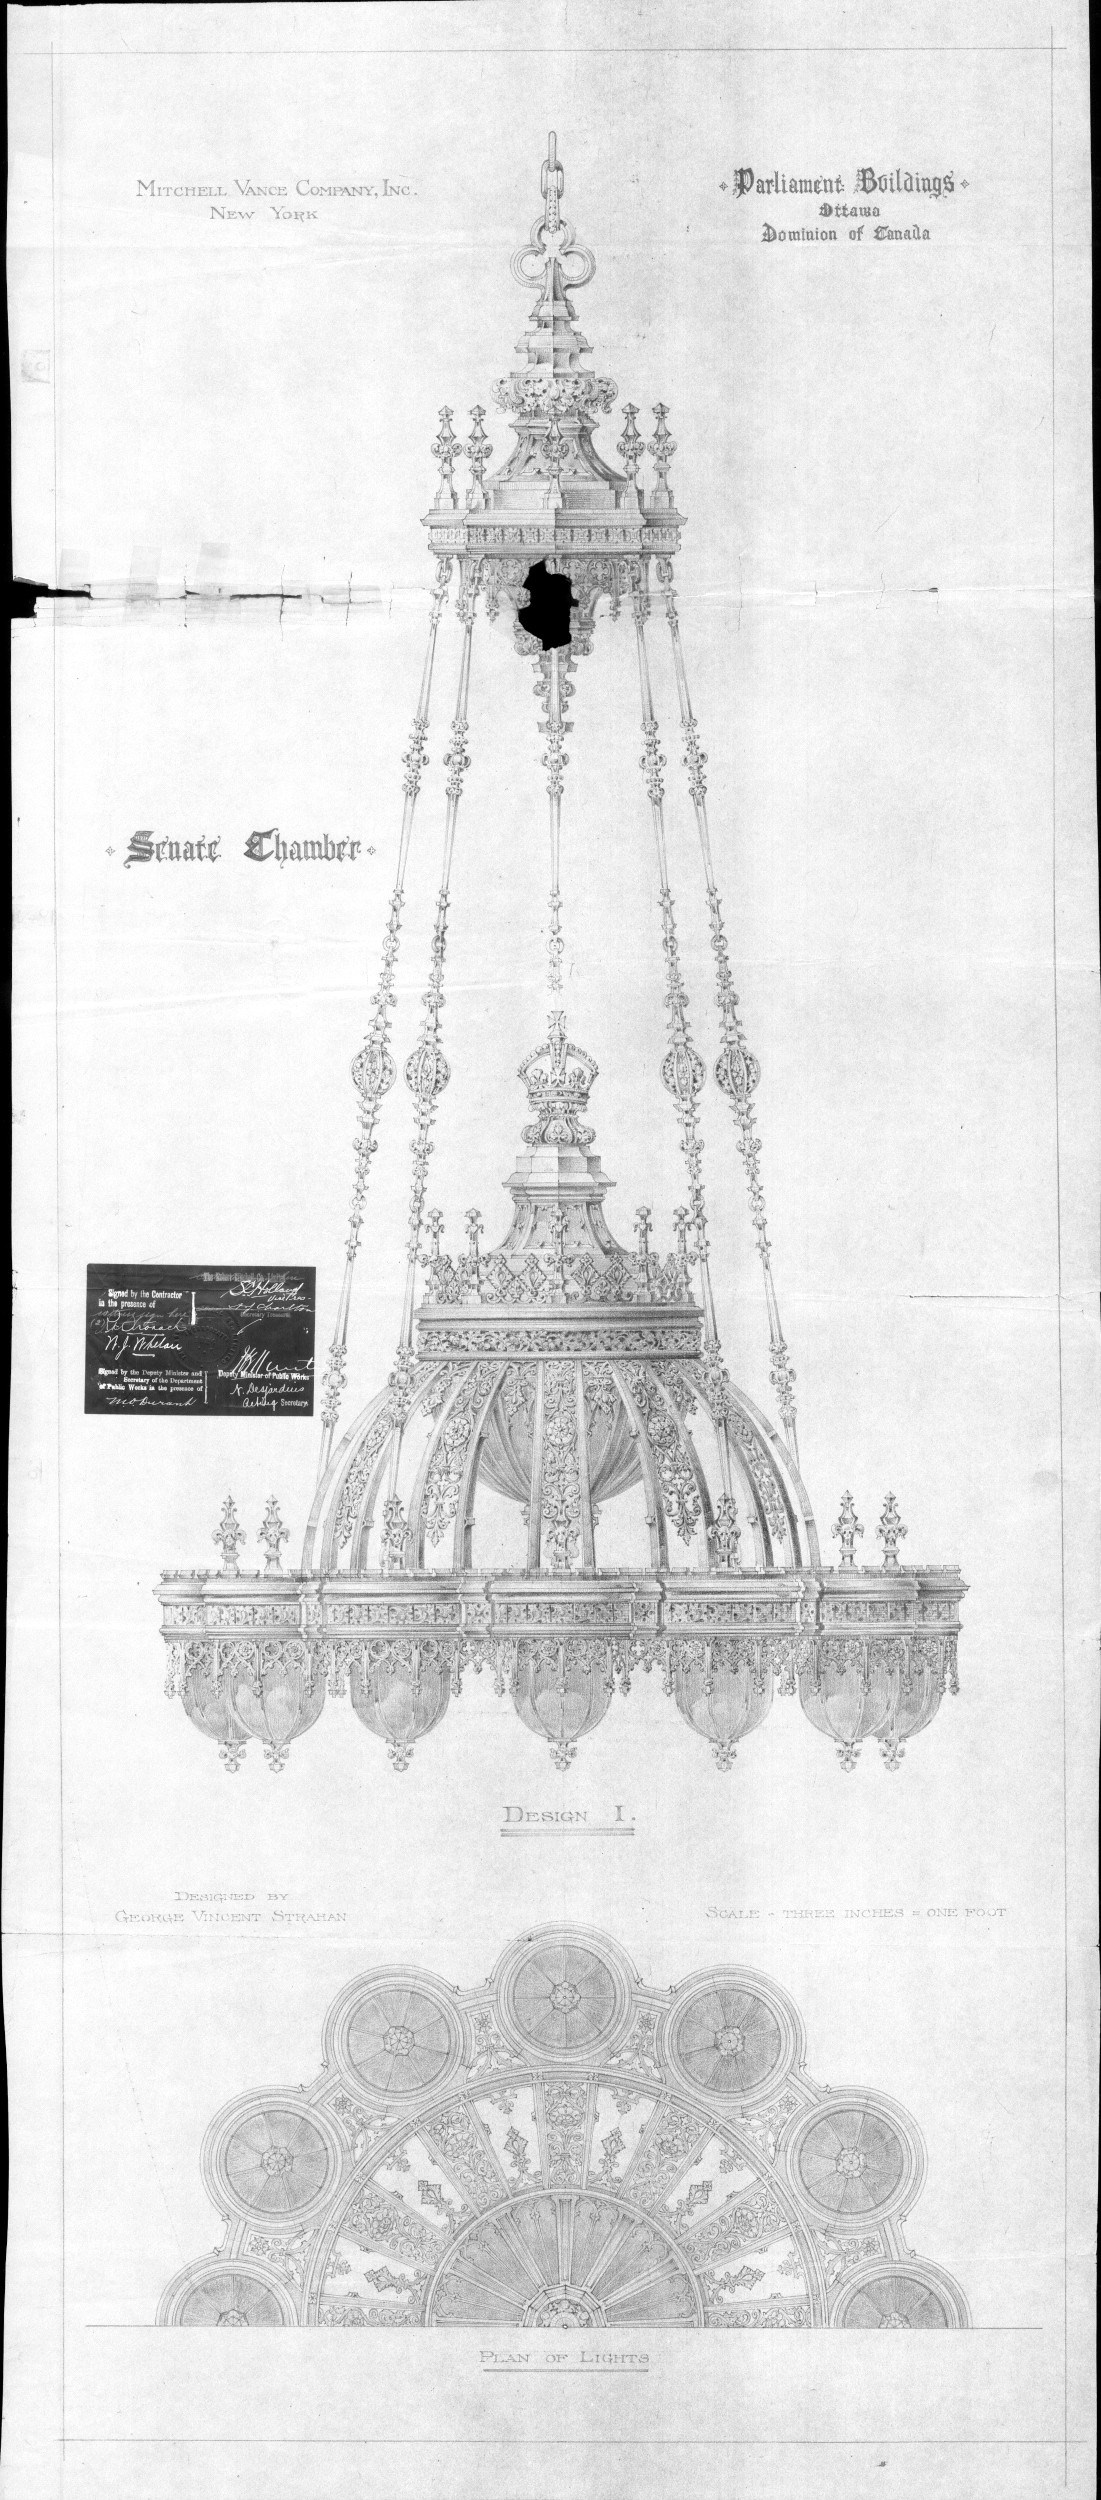 The original design drawings of the Senate Chamber chandeliers, credited to George Vincent Strahan of the Mitchell Vance Company. The firm was among the premier lighting fixture manufacturers in the United States between 1850 and the early 1900s, according to Chris Nelson of Lighting Nelson & Garrett. (Photo credit: Public Services and Procurement Canada)